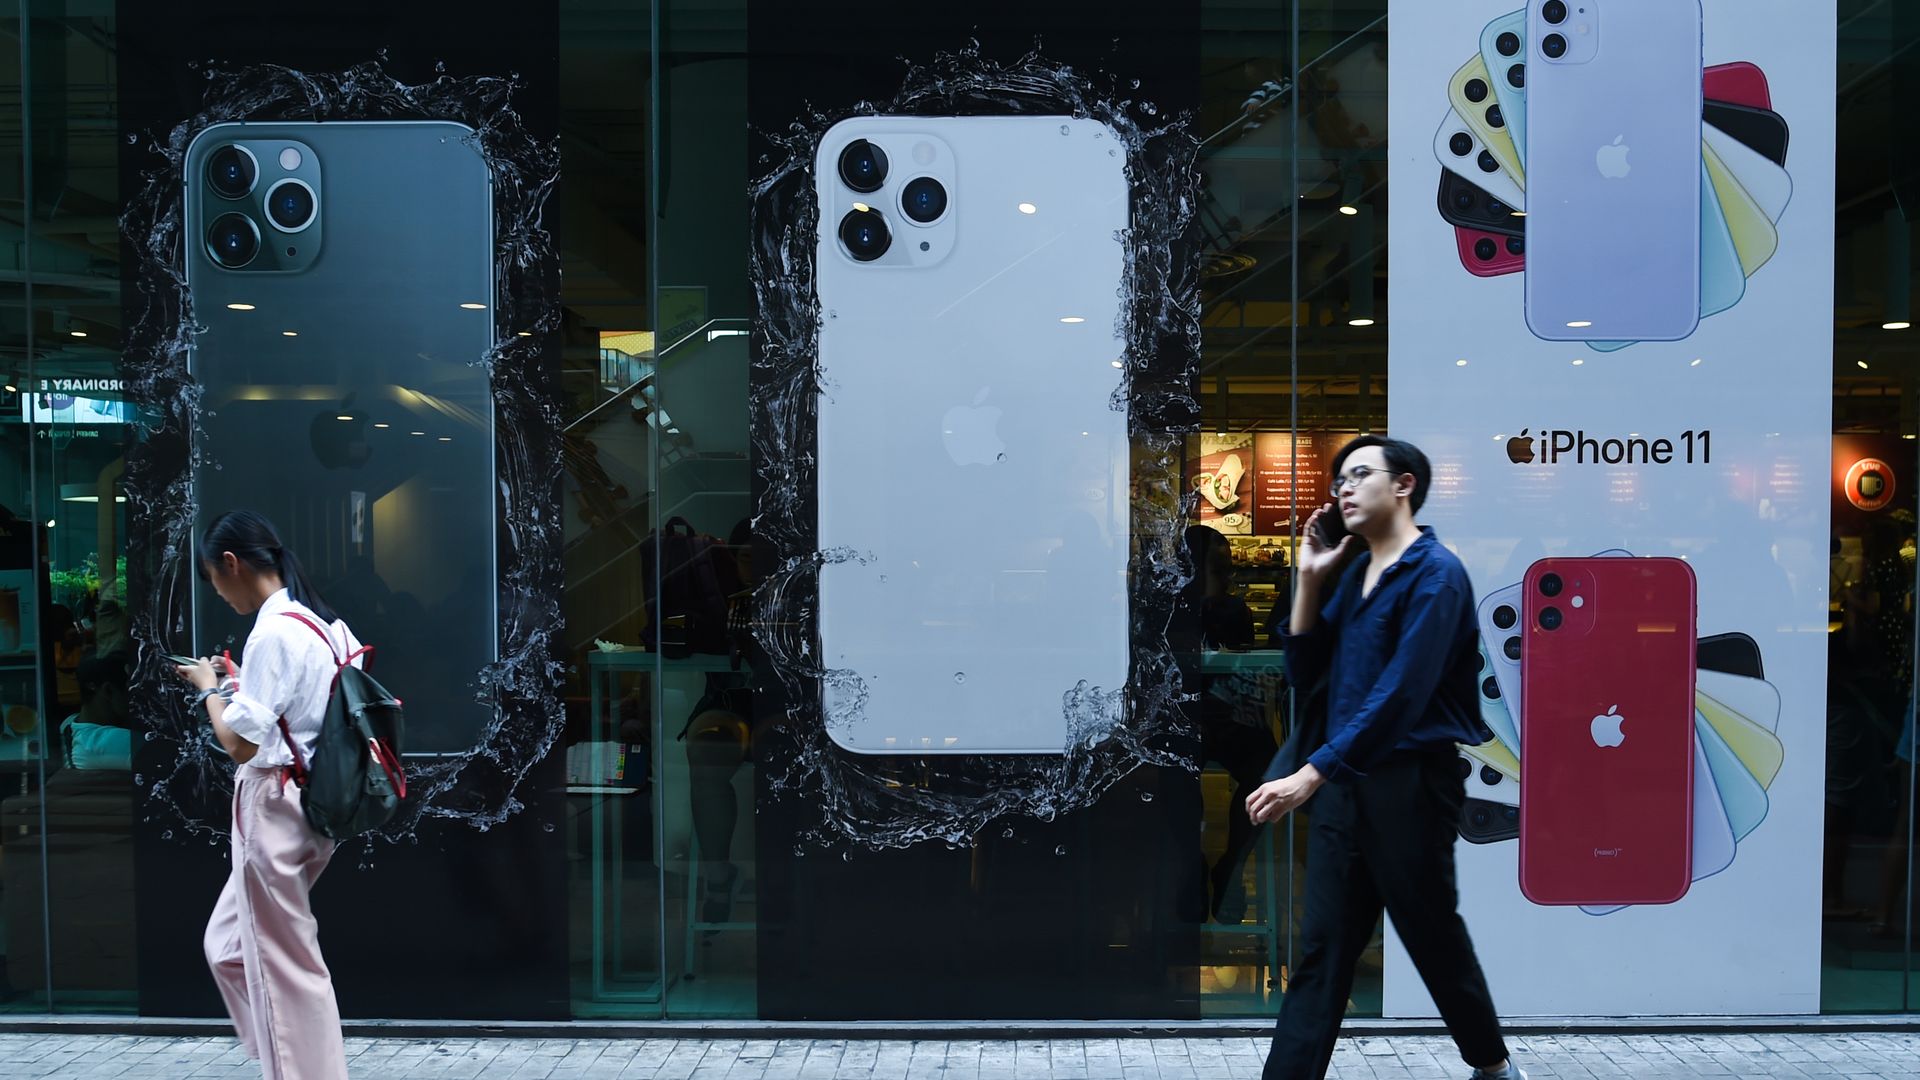 Ads for the iPhone 11 at a storefront